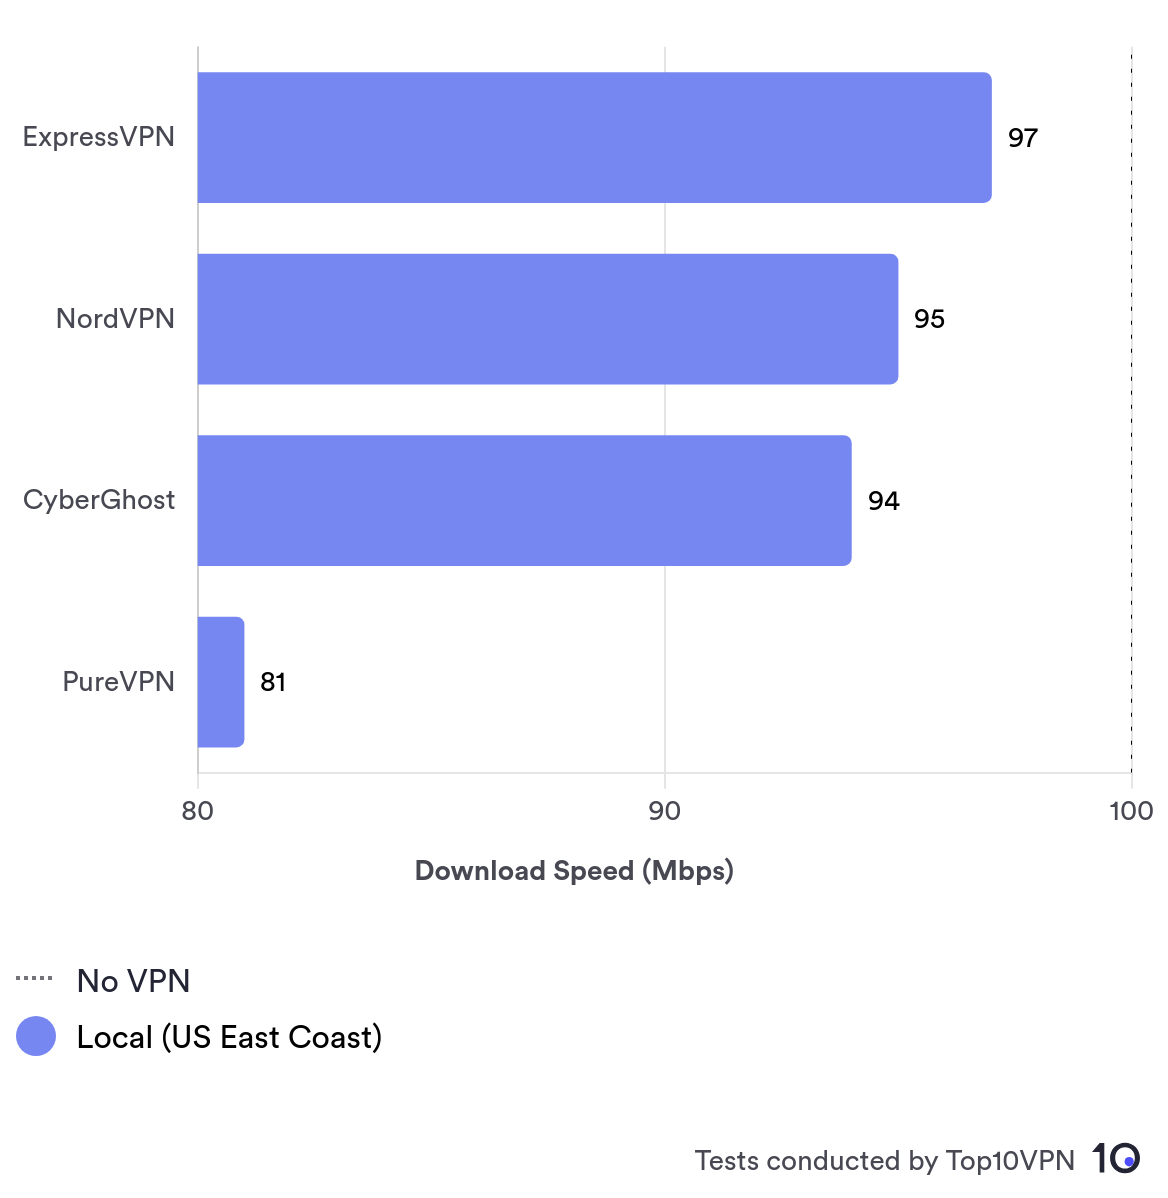 Comparison bar chart showing ExpressVPN's local speed performance against other leading VPN services.